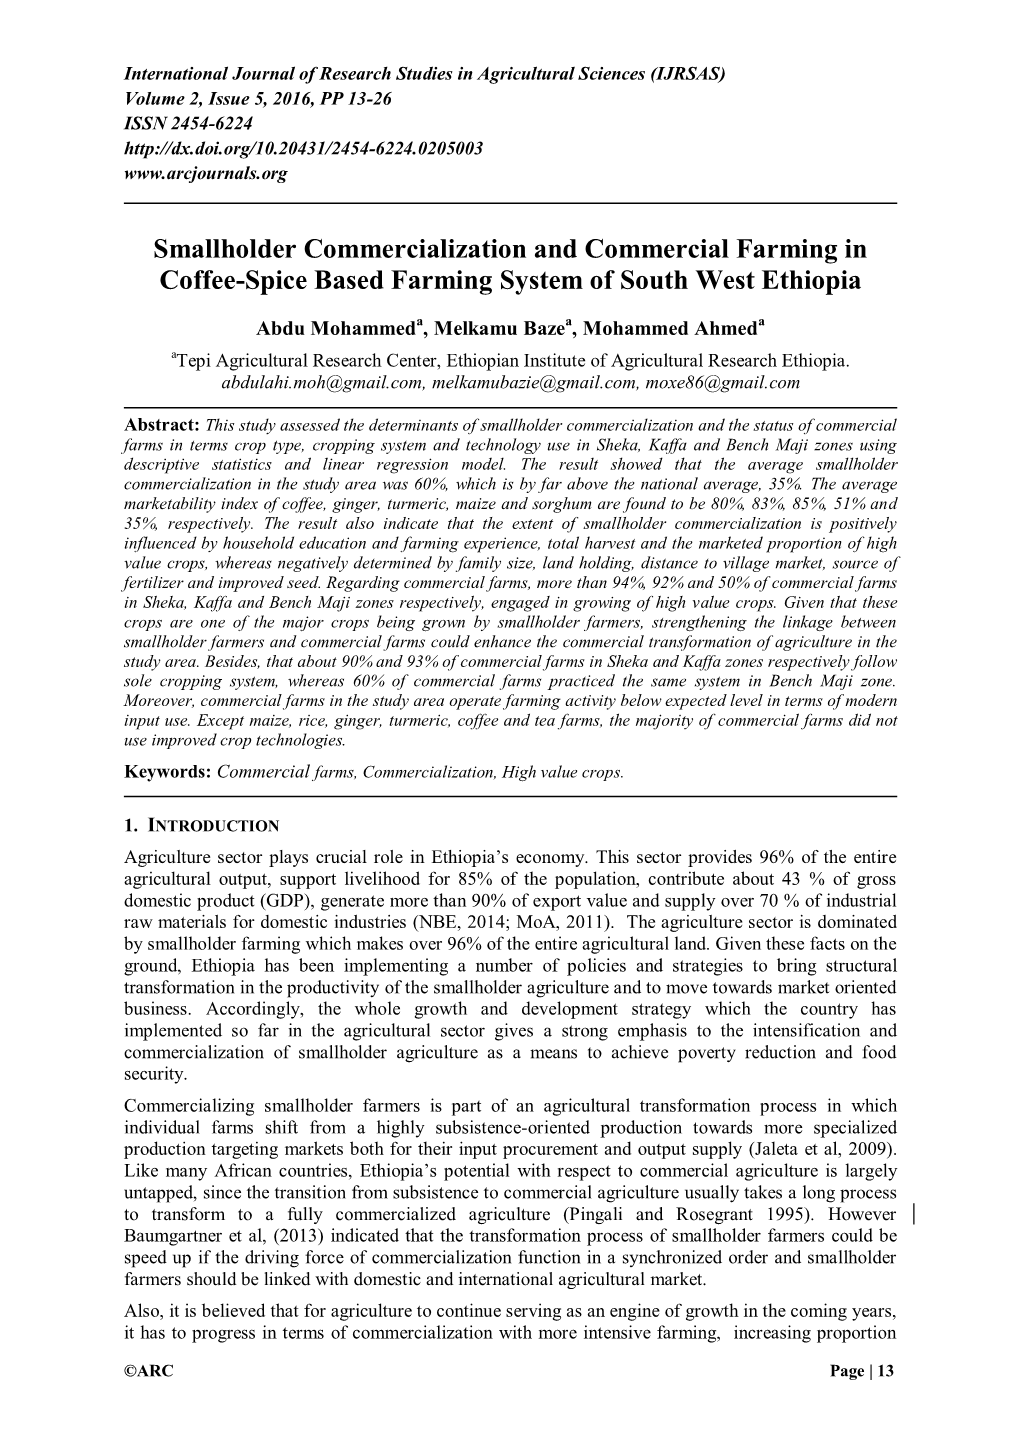 Smallholder Commercialization and Commercial Farming in Coffee-Spice Based Farming System of South West Ethiopia